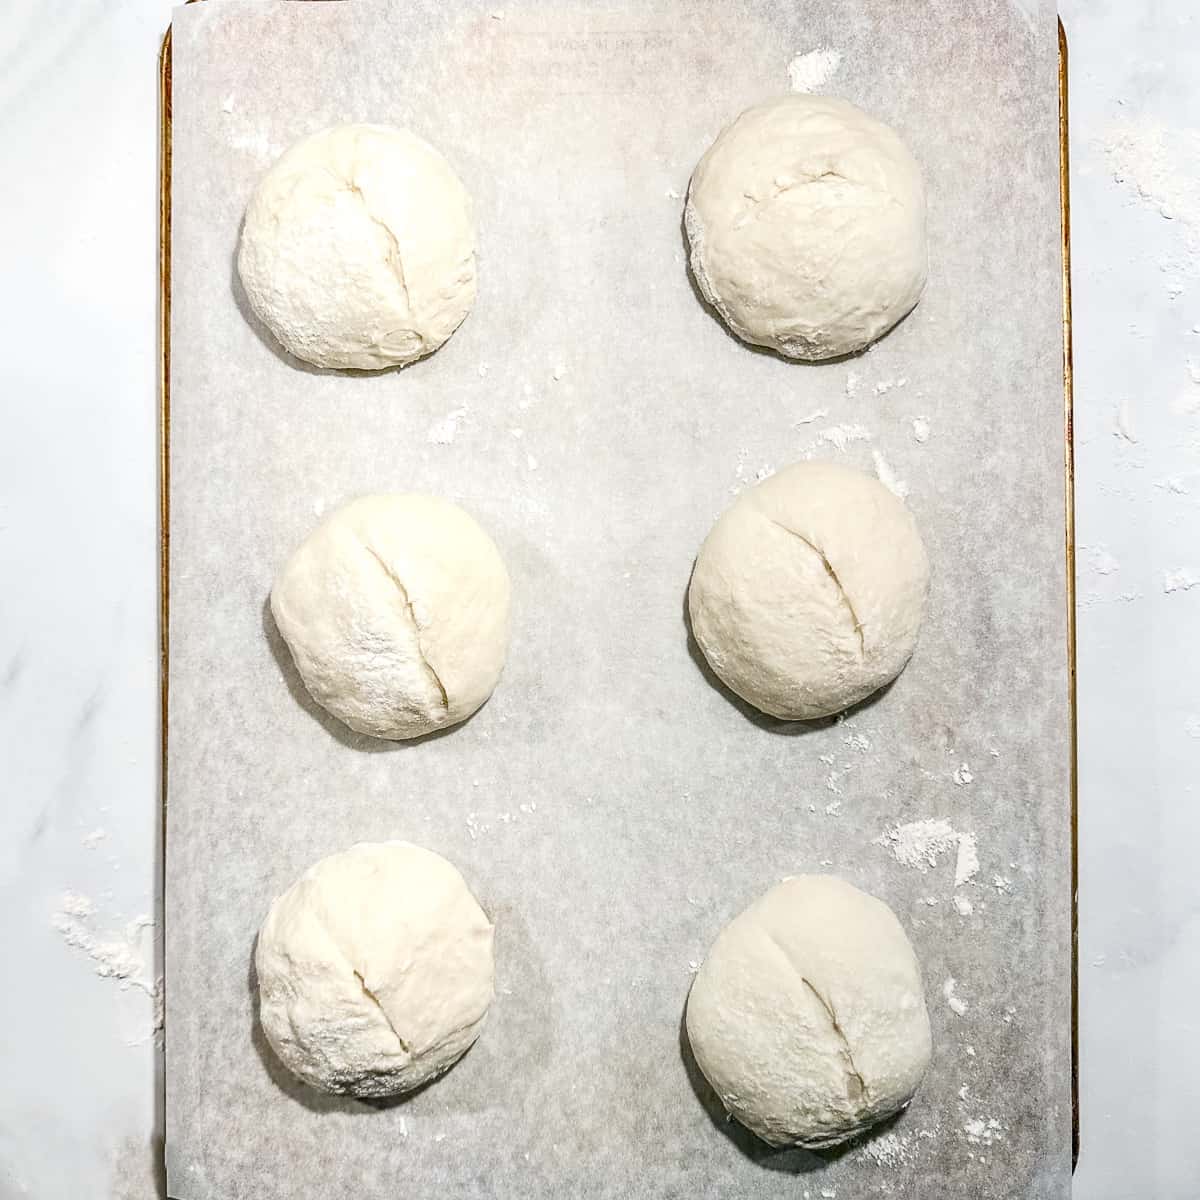 placing slashed dough balls on a piece of parchment paper placed on the back of a sheet pan.